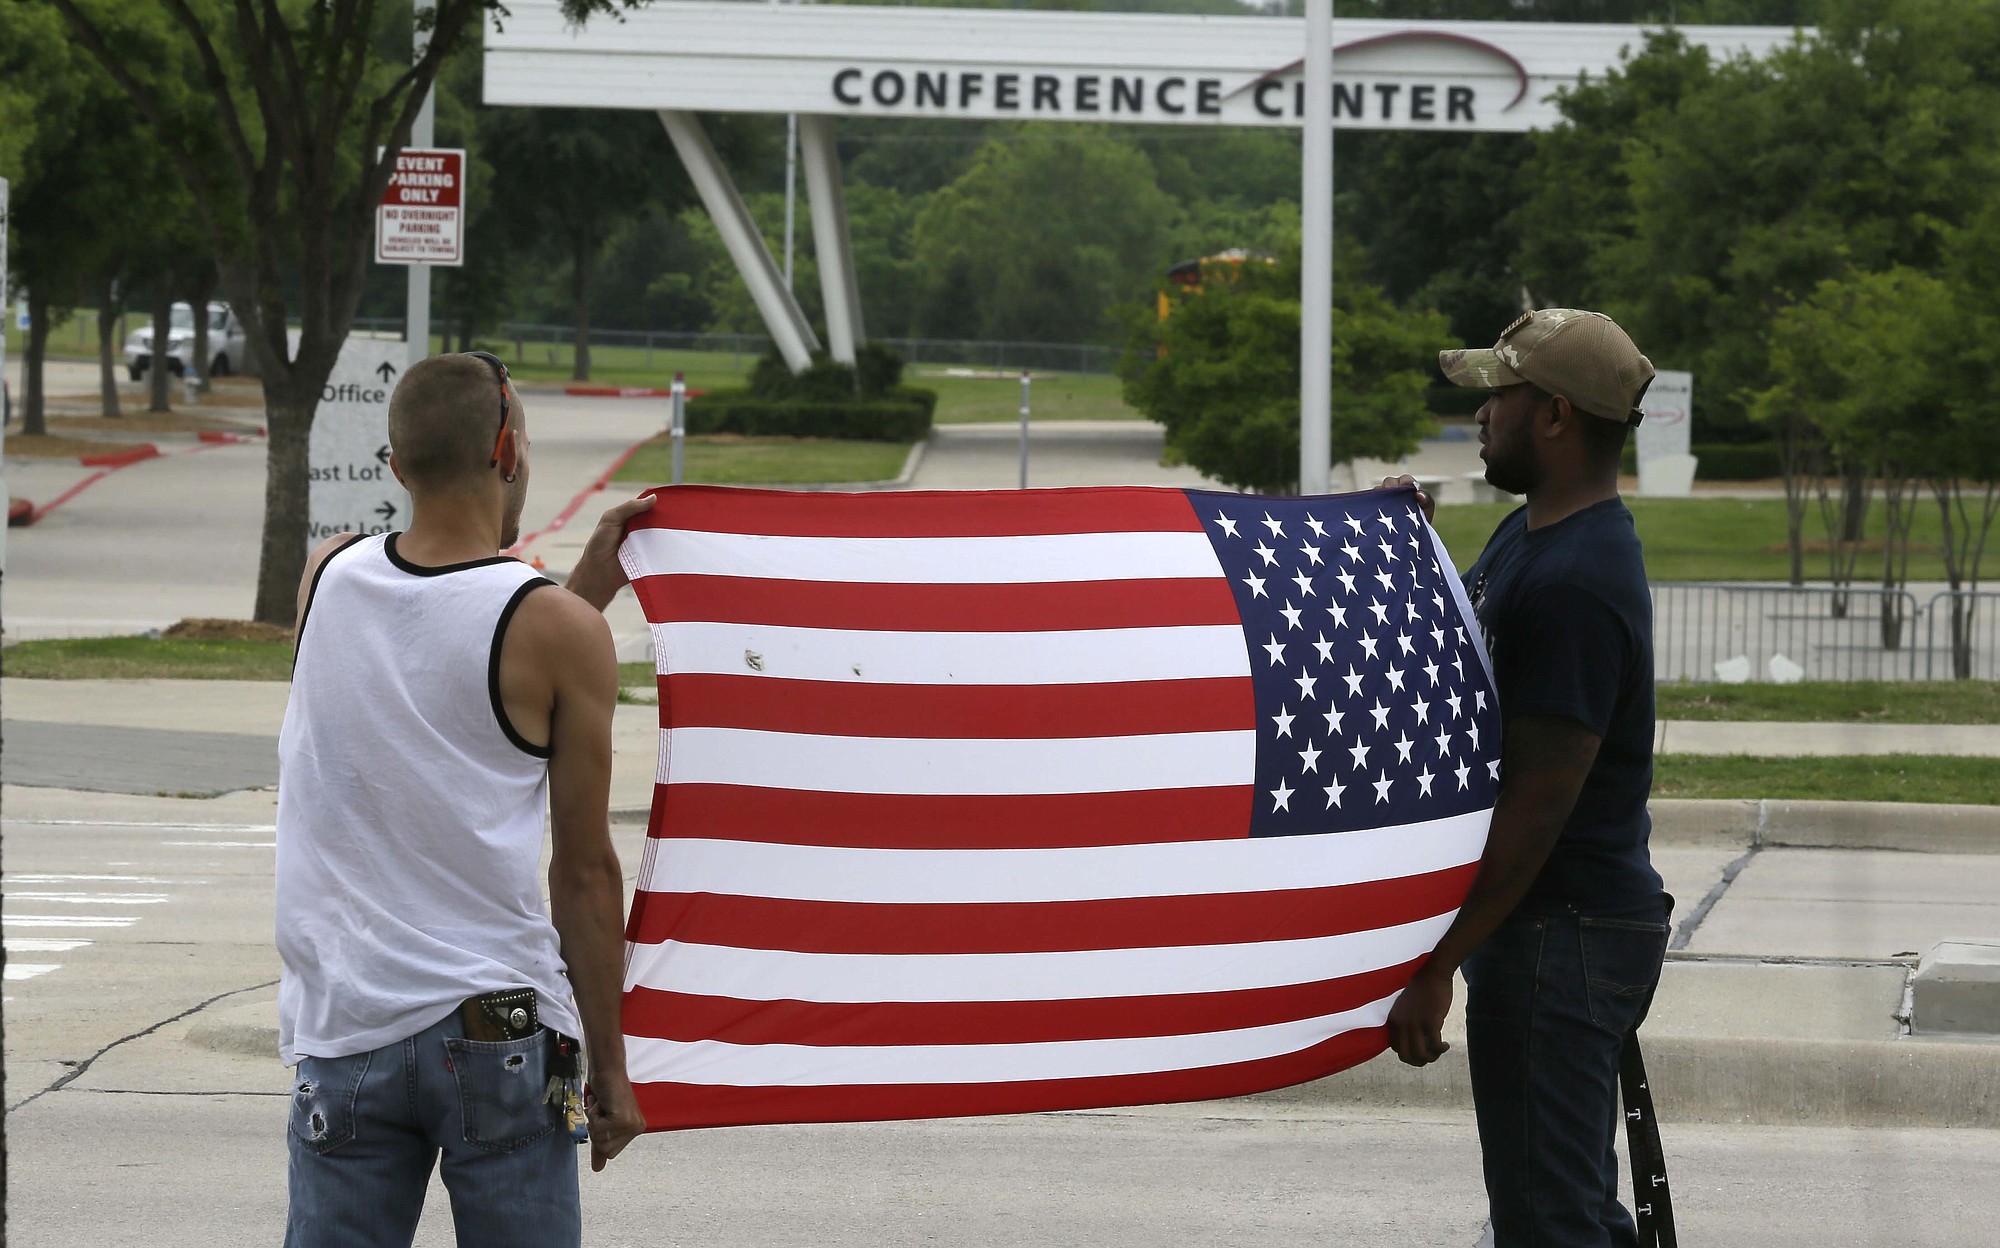 Joseph Offutt, right, and Conner McCasland hold a U.S. flag across the street from the Curtis Culwell Center, on Tuesday in Garland, Texas. A man whose social media presence was being scrutinized by federal authorities was one of two suspects in the Sunday shooting at this location that hosted a cartoon contest featuring images of the Muslim Prophet Muhammad.